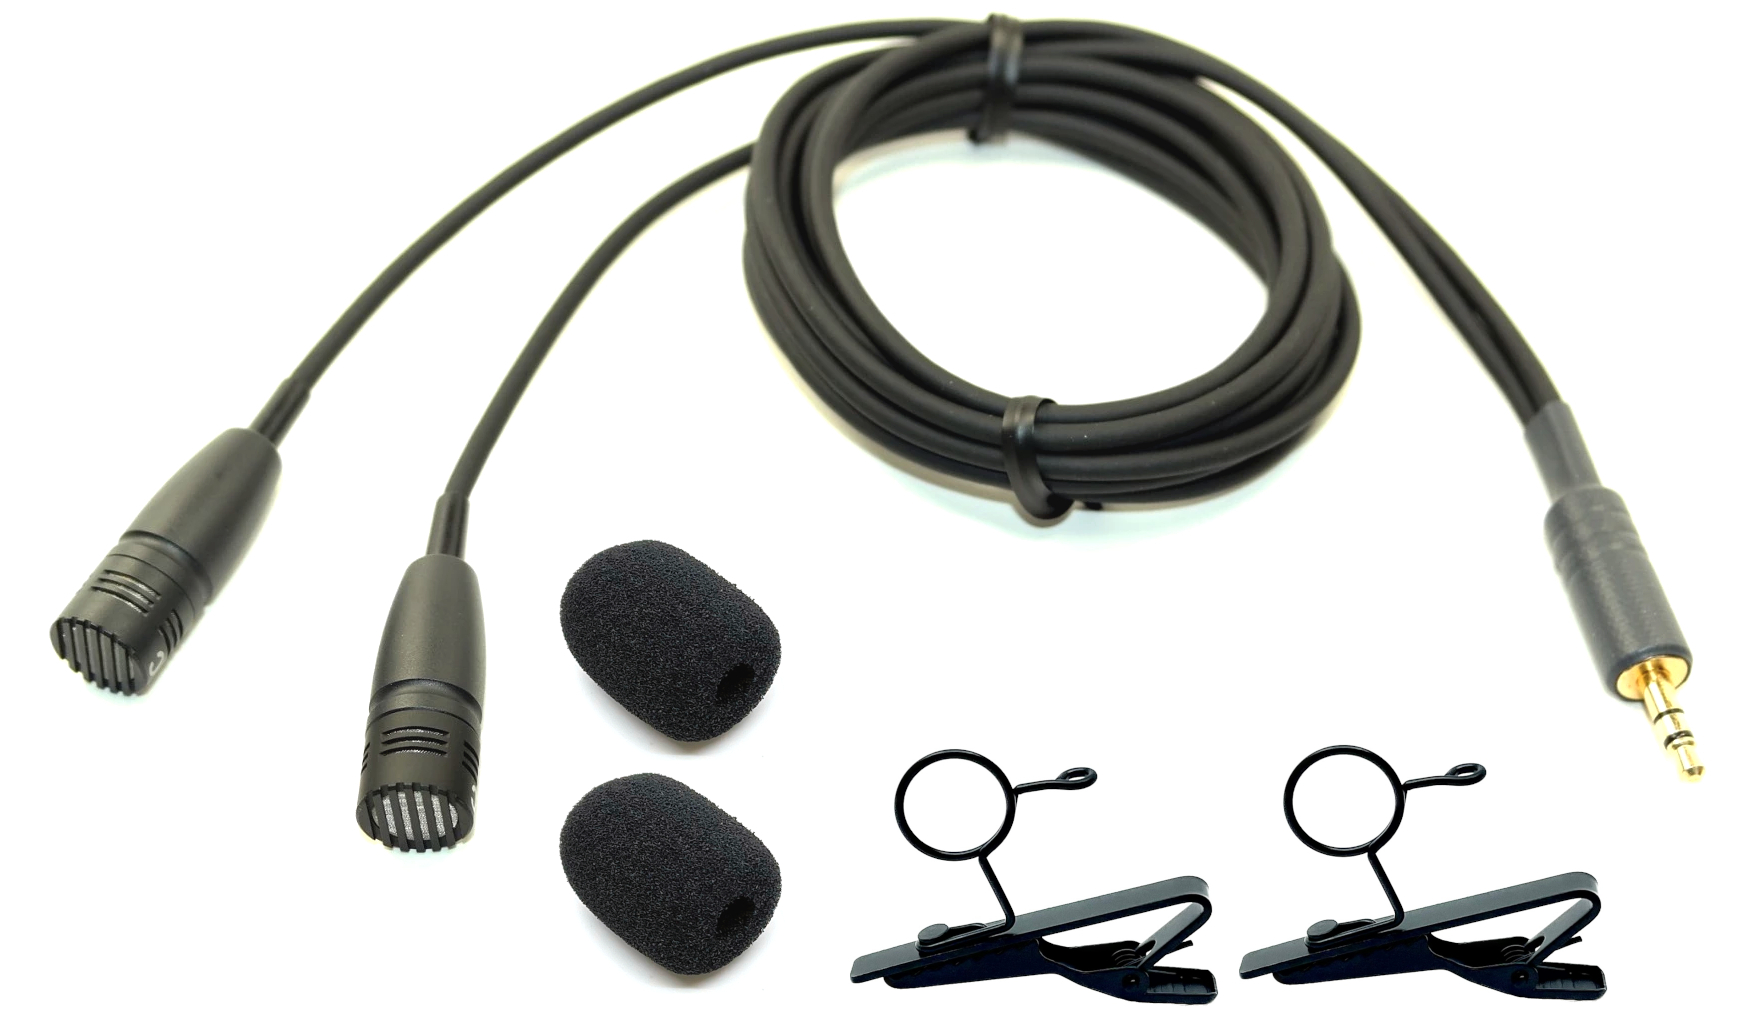 Premium Audio Technica Cardioid Stereo Microphones Questions & Answers